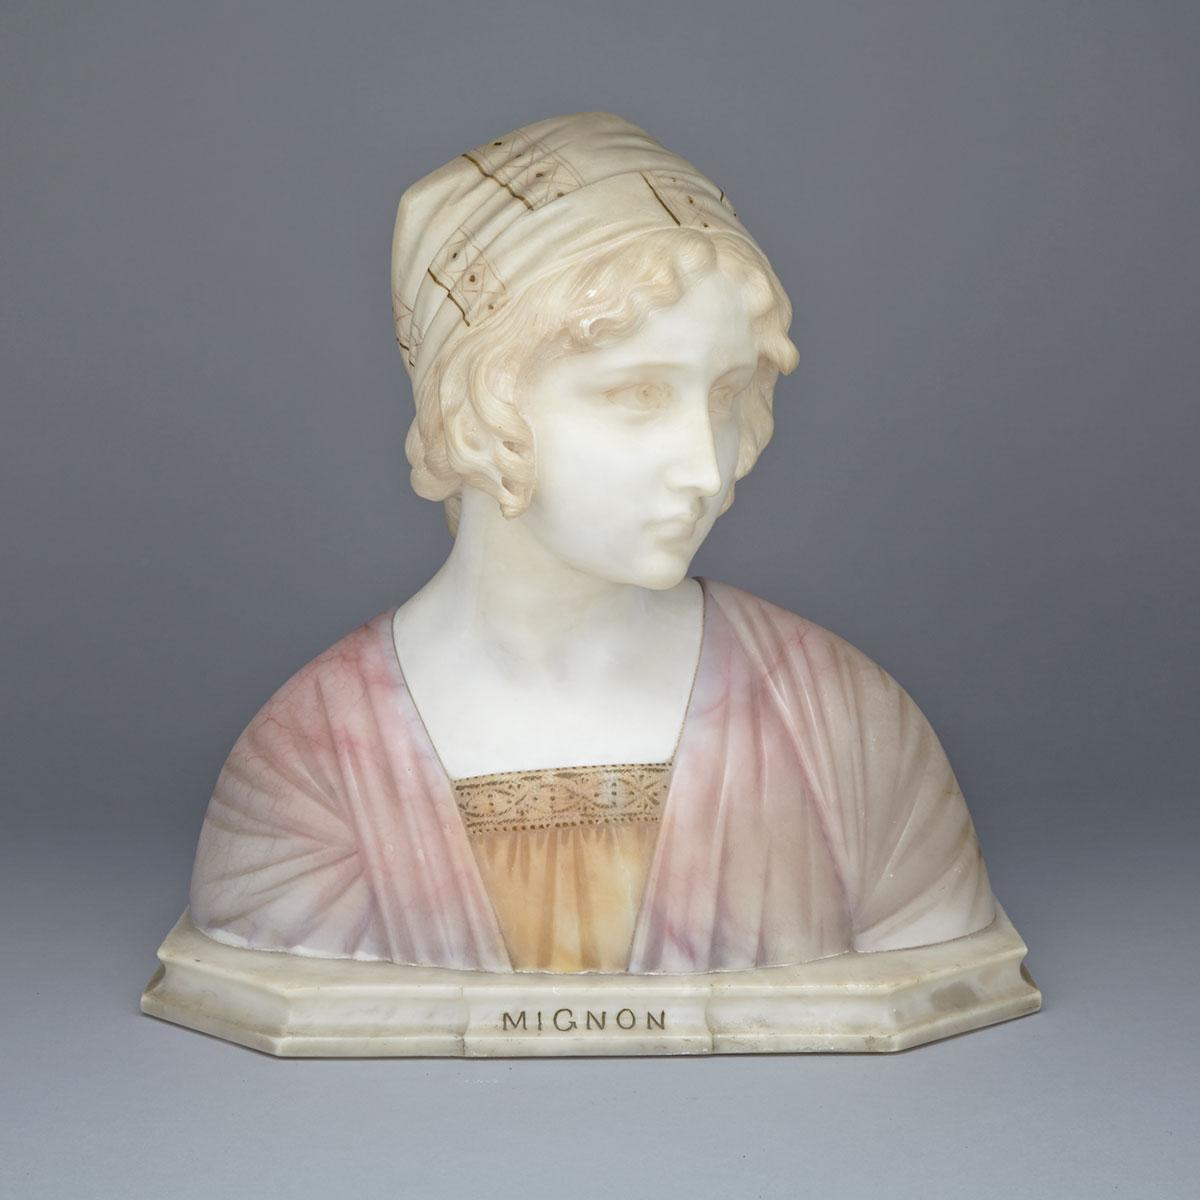 Italian Carved and Stained Marble bust of a Young Girl, ‘Mignon’, c.1900